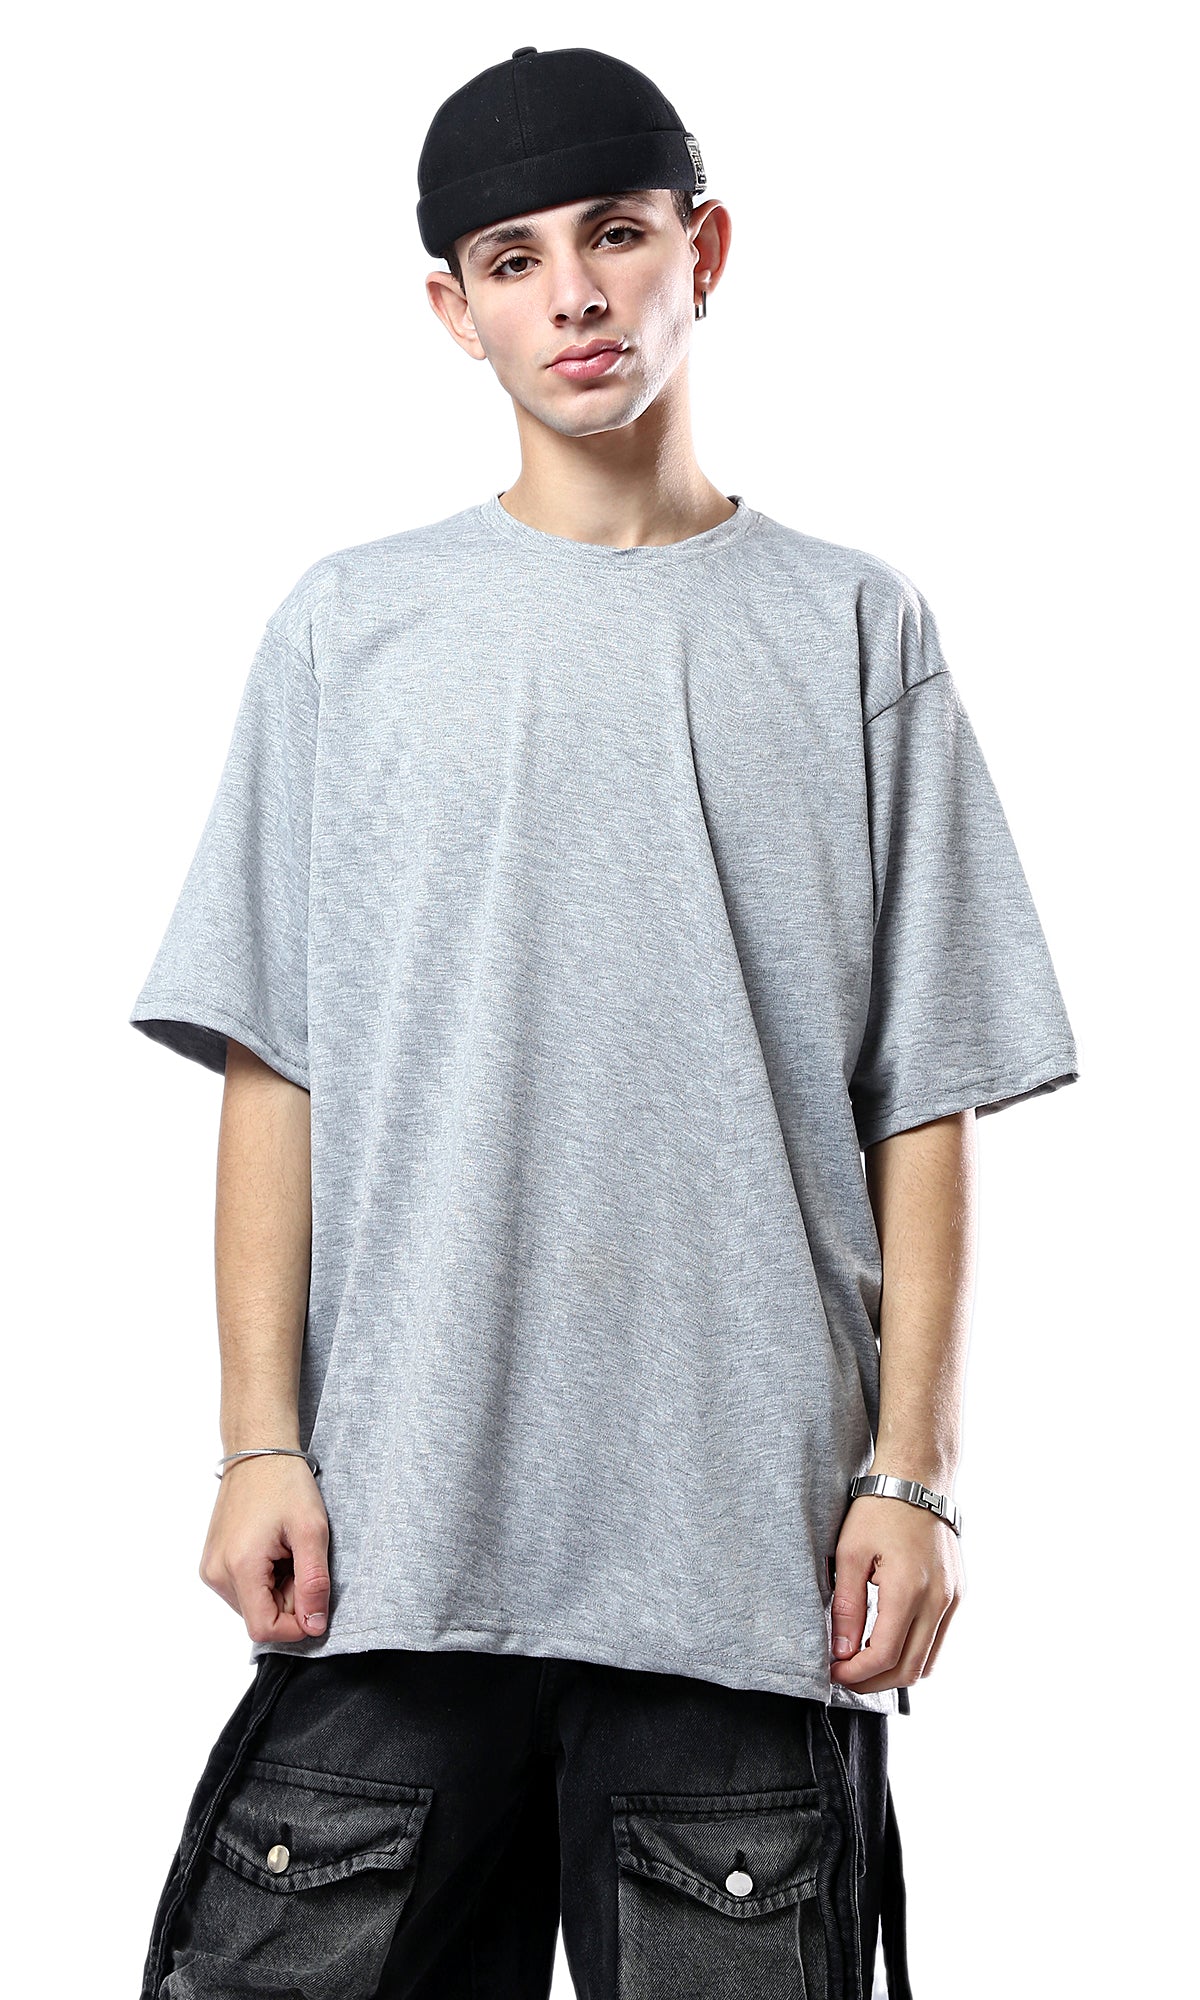 O180763 Relaxed Fit Heather Grey Comfy Slip On Tee